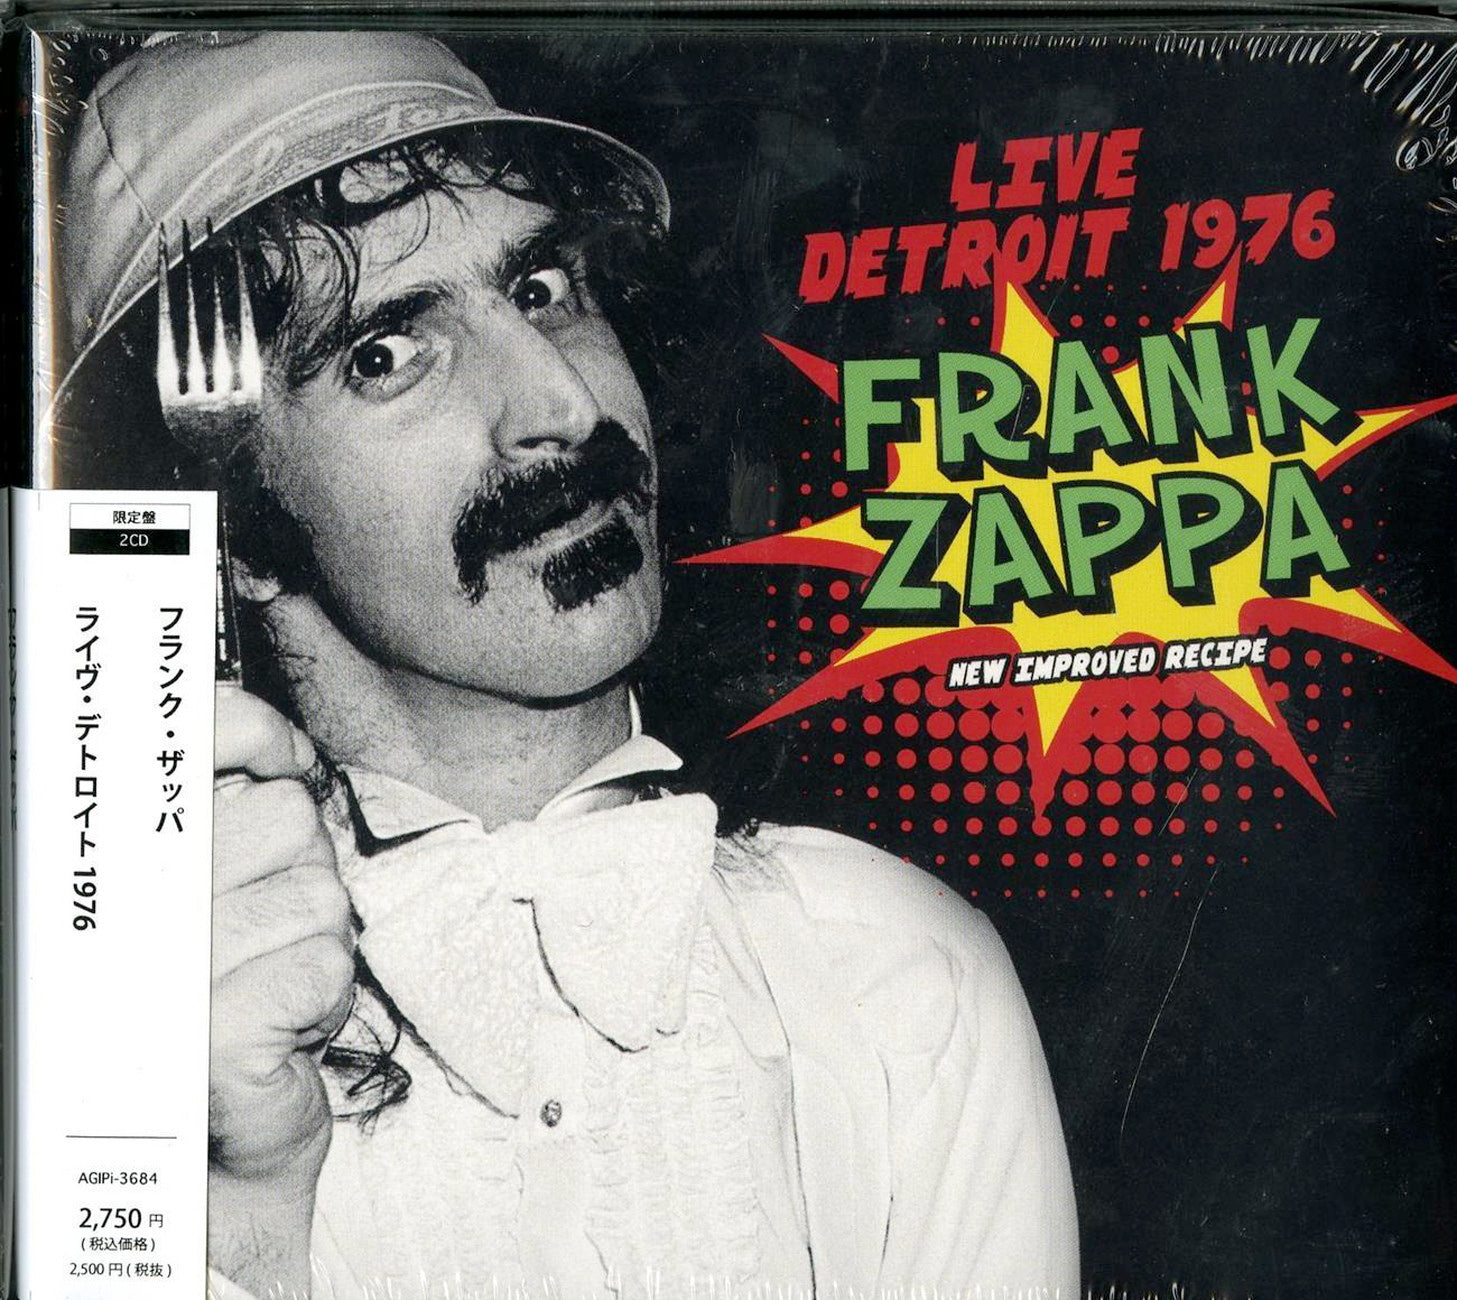 Frank Zappa - Live Detroi 1976 - Import 2 CD Limited Edition – CDs